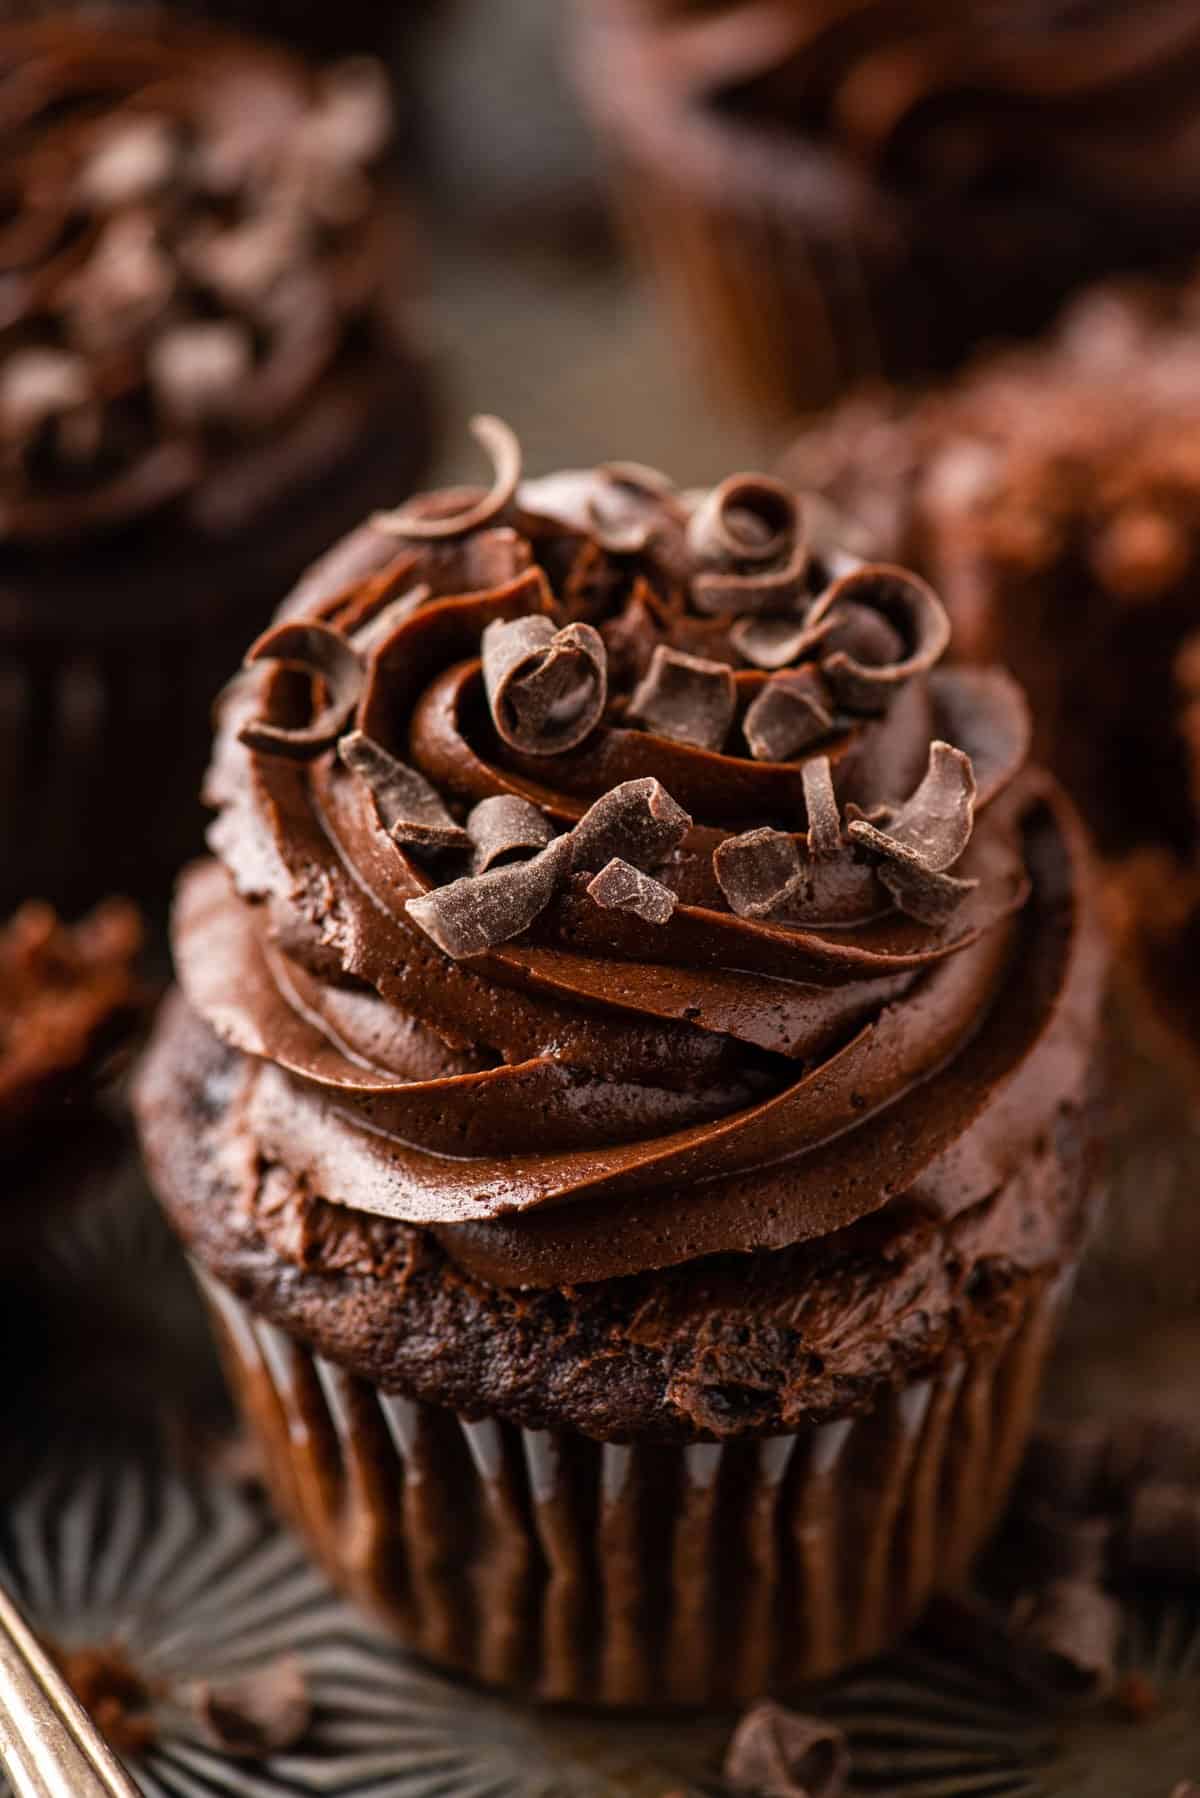 chocolate cupcake with chocolate frosting on metal background with more cupcakes in the distance